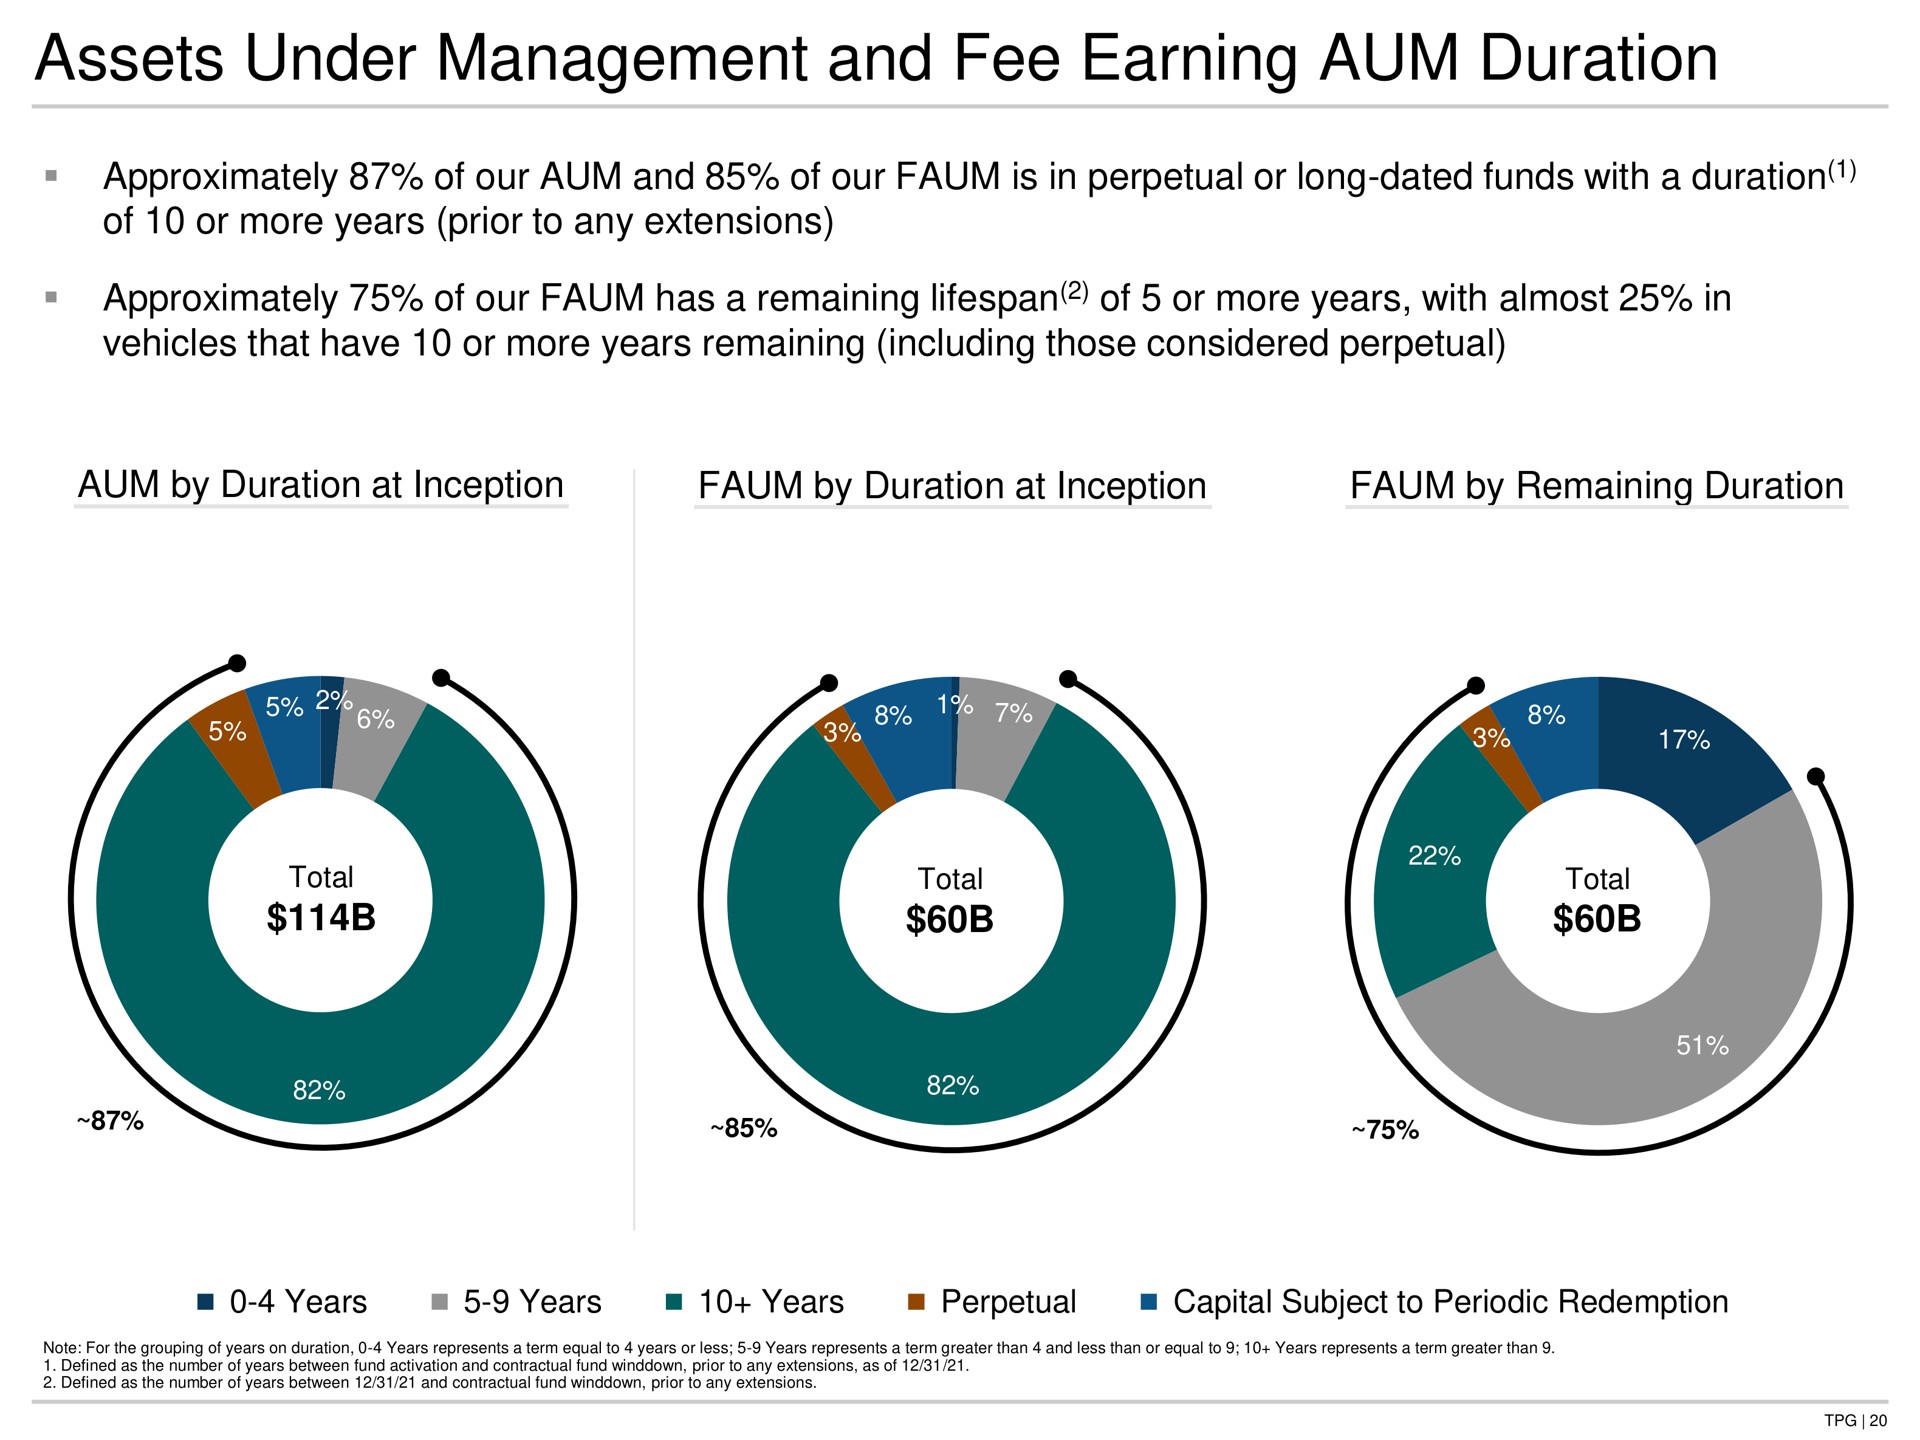 assets under management and fee earning aum duration approximately of our aum and of our is in perpetual or long dated funds with a duration of or more years prior to any extensions approximately of our has a remaining of or more years with almost in vehicles that have or more years remaining including those considered perpetual aum by duration at inception by duration at inception by remaining duration years years years perpetual capital subject to periodic redemption | TPG